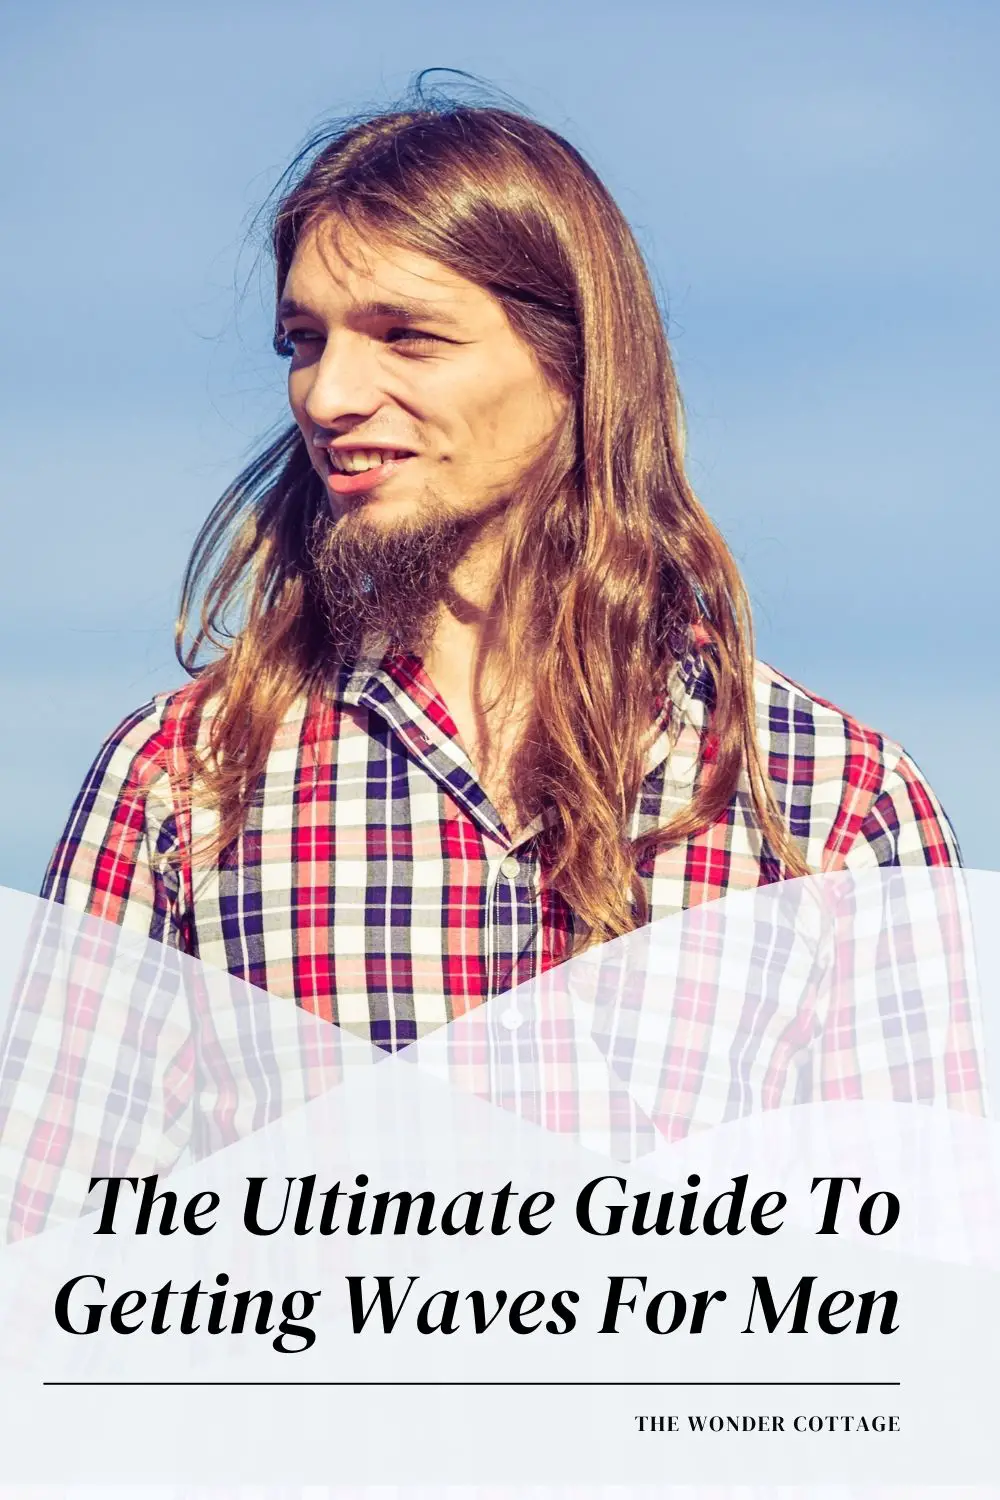 The Ultimate Guide To Getting Waves For Men